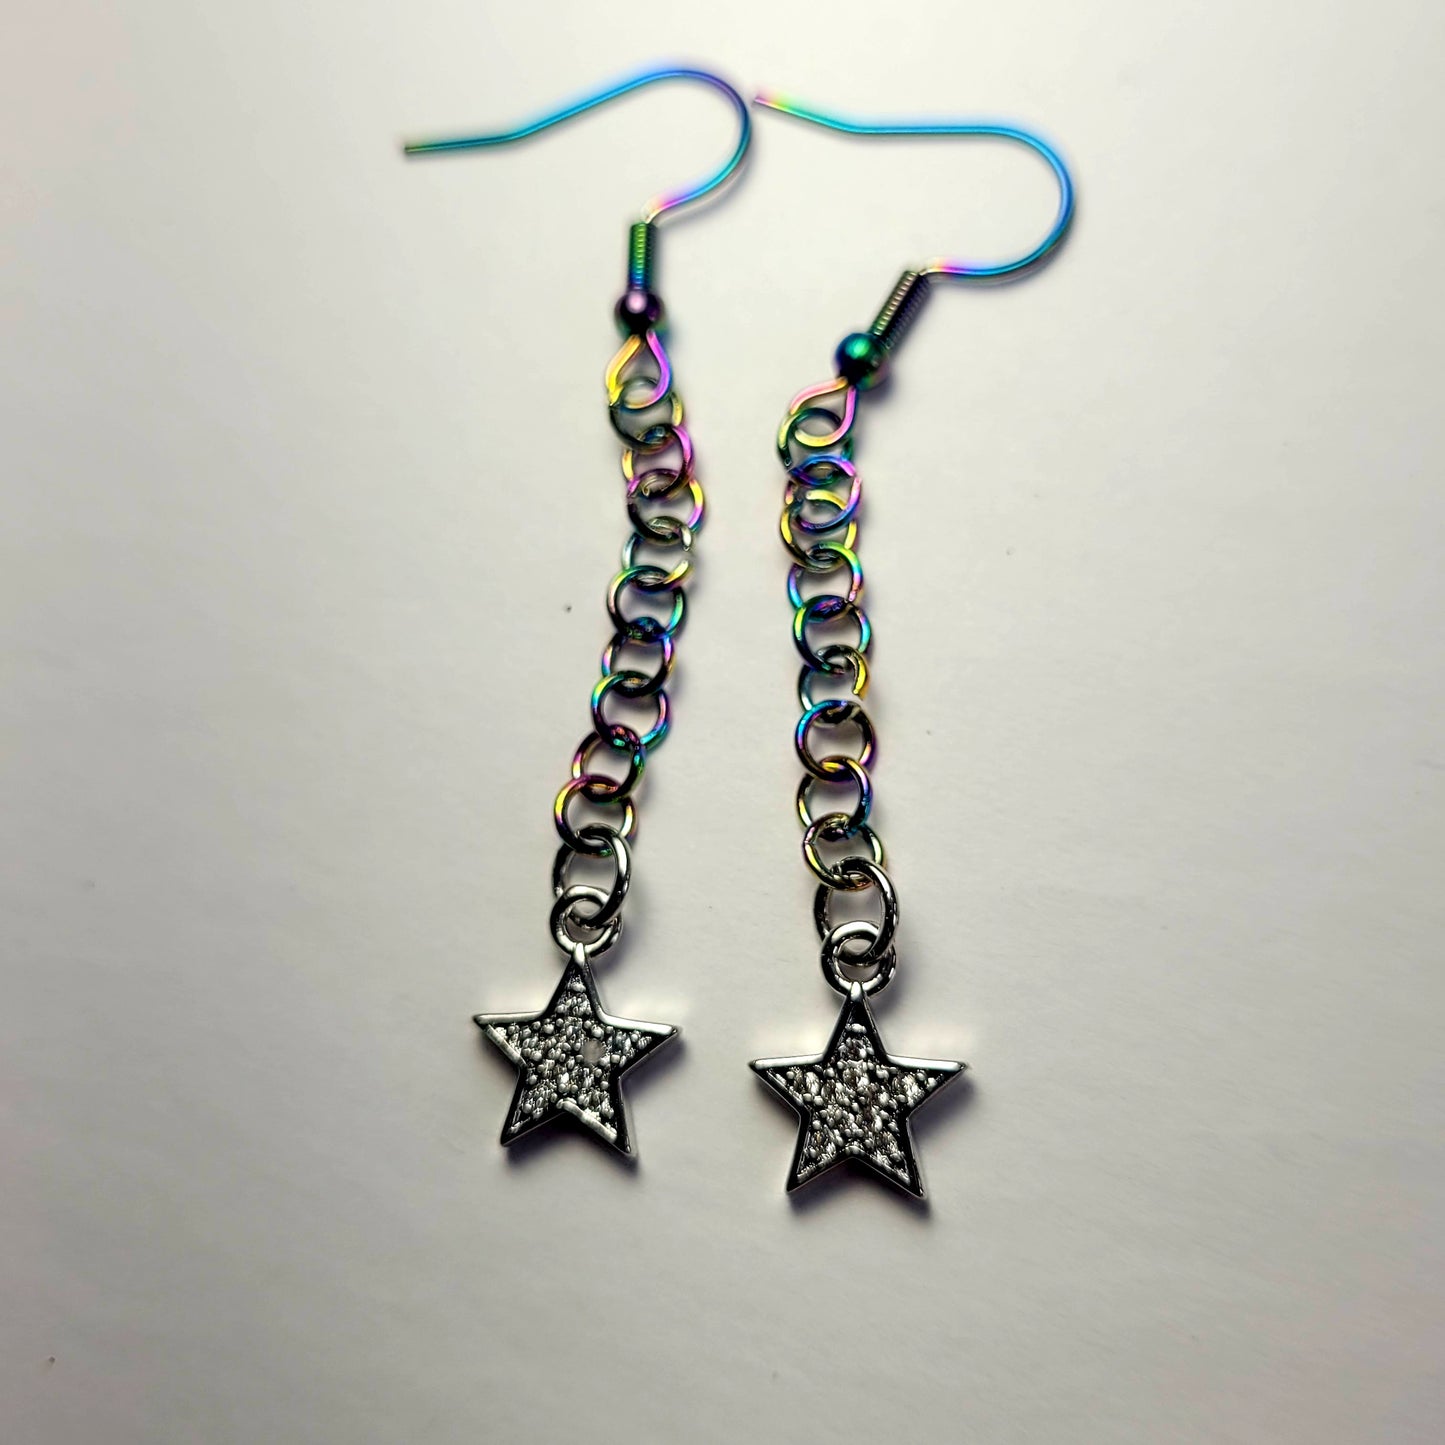 Earrings, multichrome rainbow chainmaille with dangle star